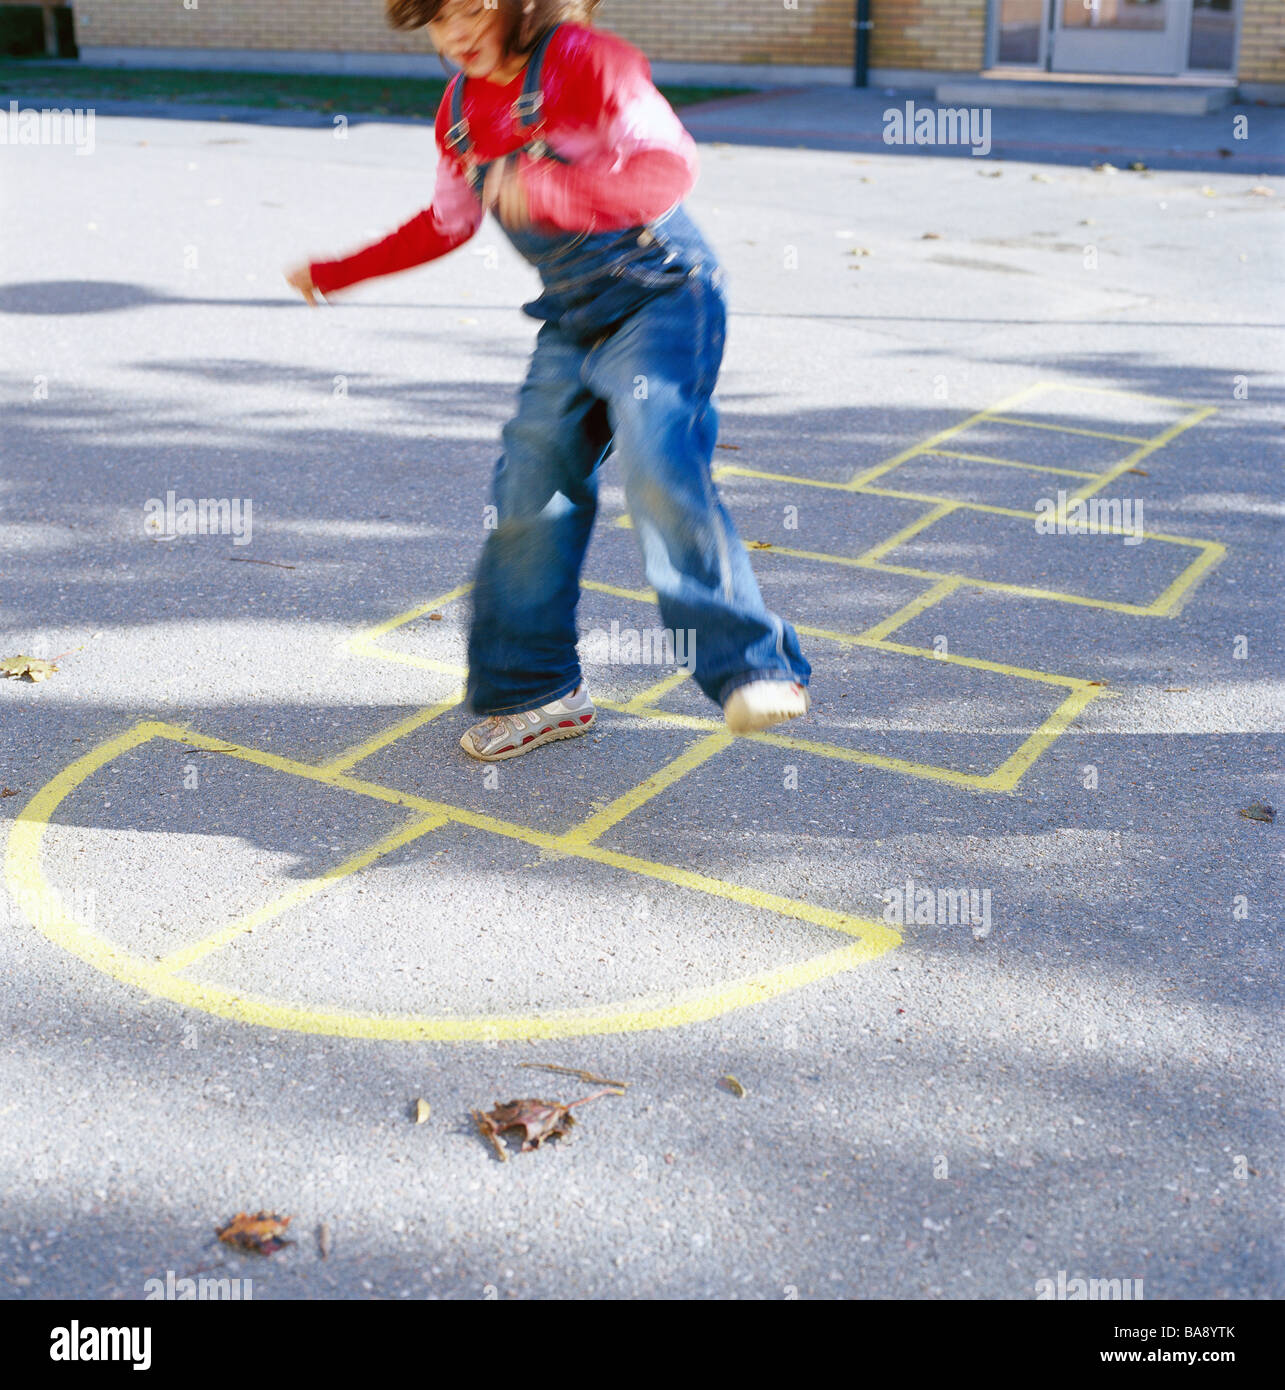 A girl playing hopscotch, Sweden. Stock Photo